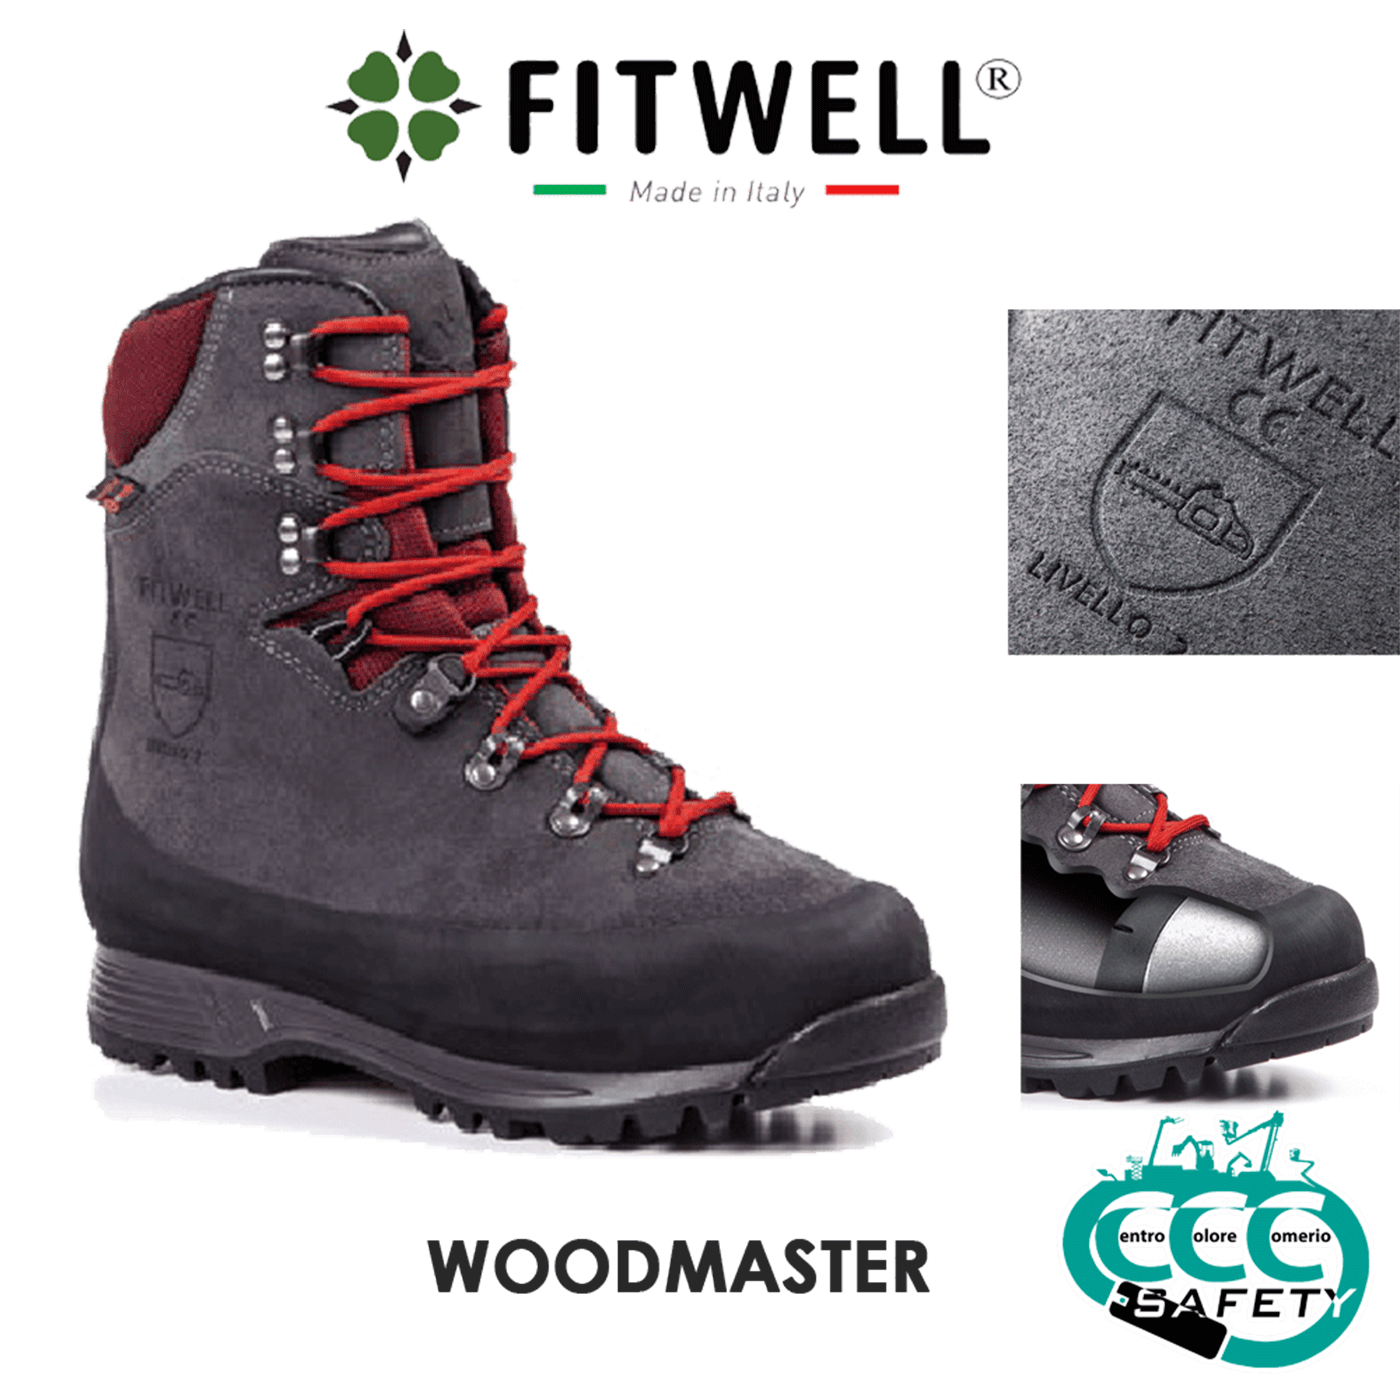 BOOTS - FITWELL - WOODMASTER ANTHRACITE